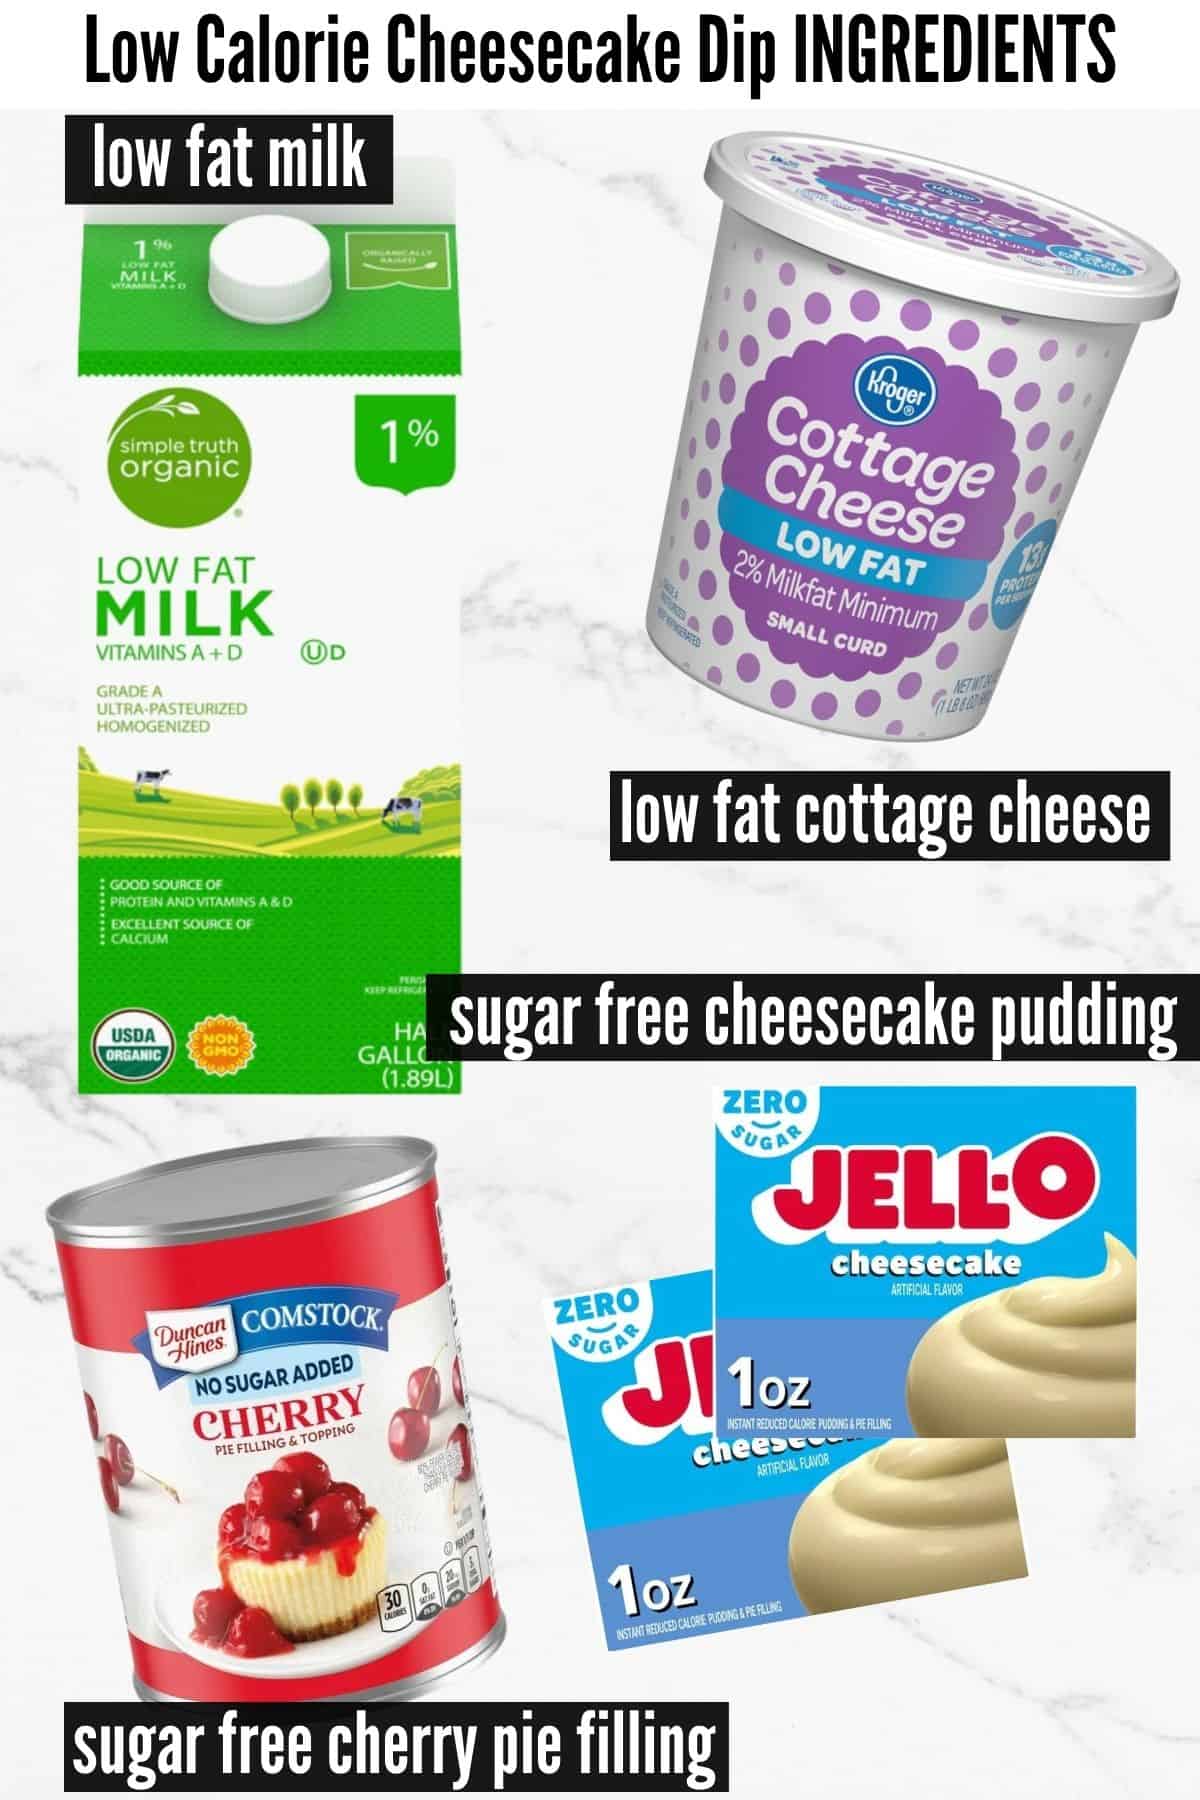 low calorie cheesecake dip labelled ingredients.